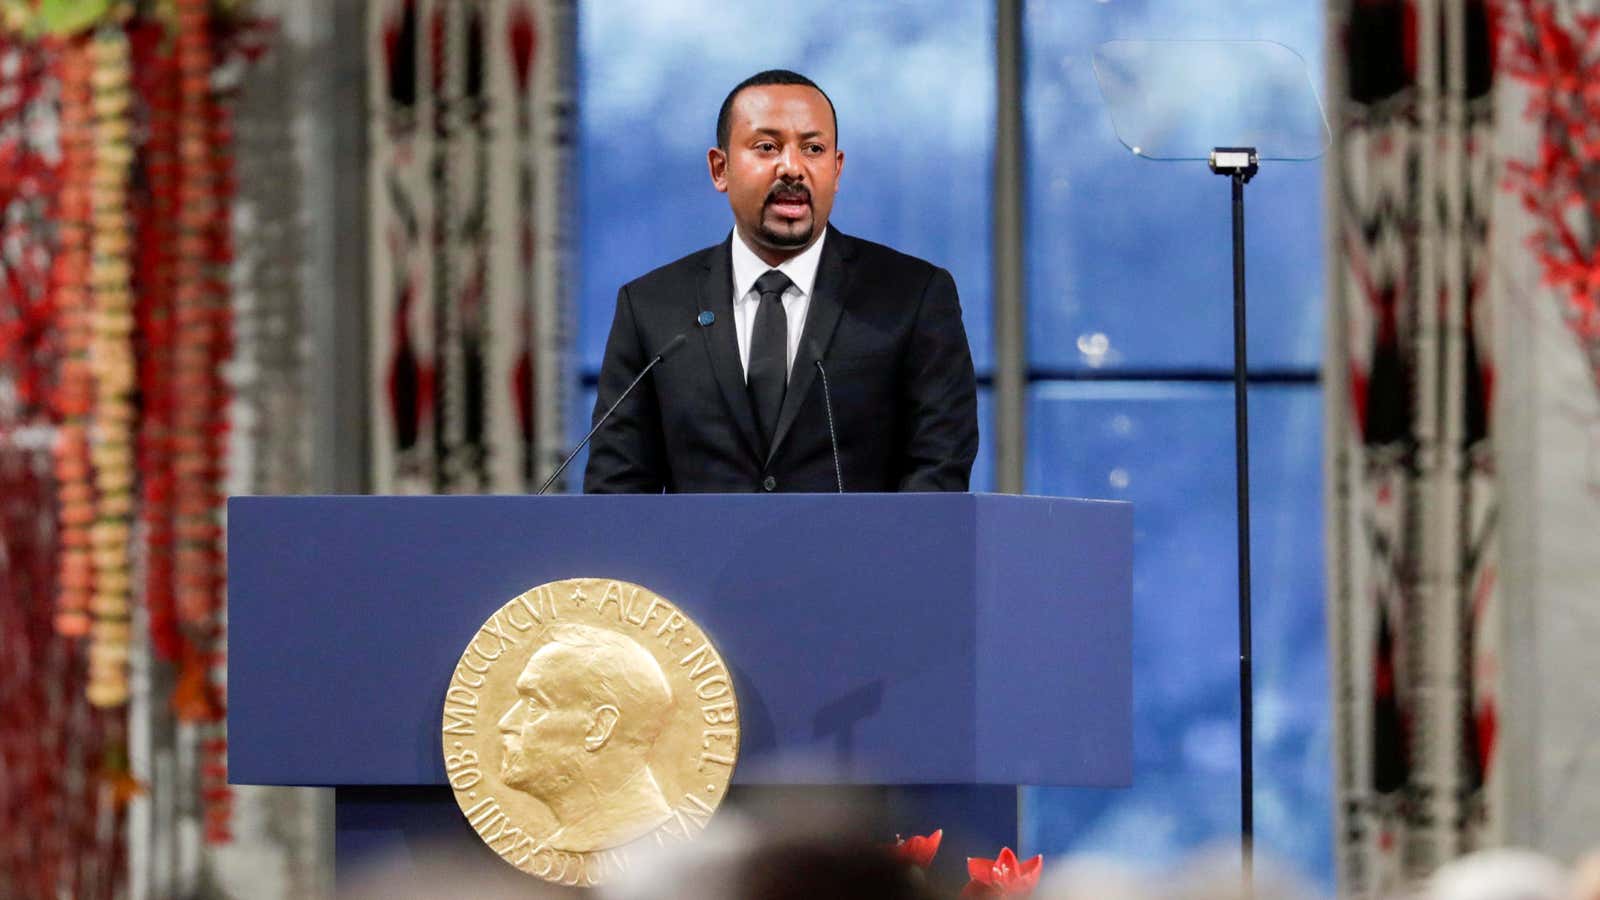 Nobel Peace Prize Laureate Ethiopian Prime Minister Abiy Ahmed Ali delivers his speech during the awarding ceremony in Oslo City Hall, Norway Dec.10, 2019.